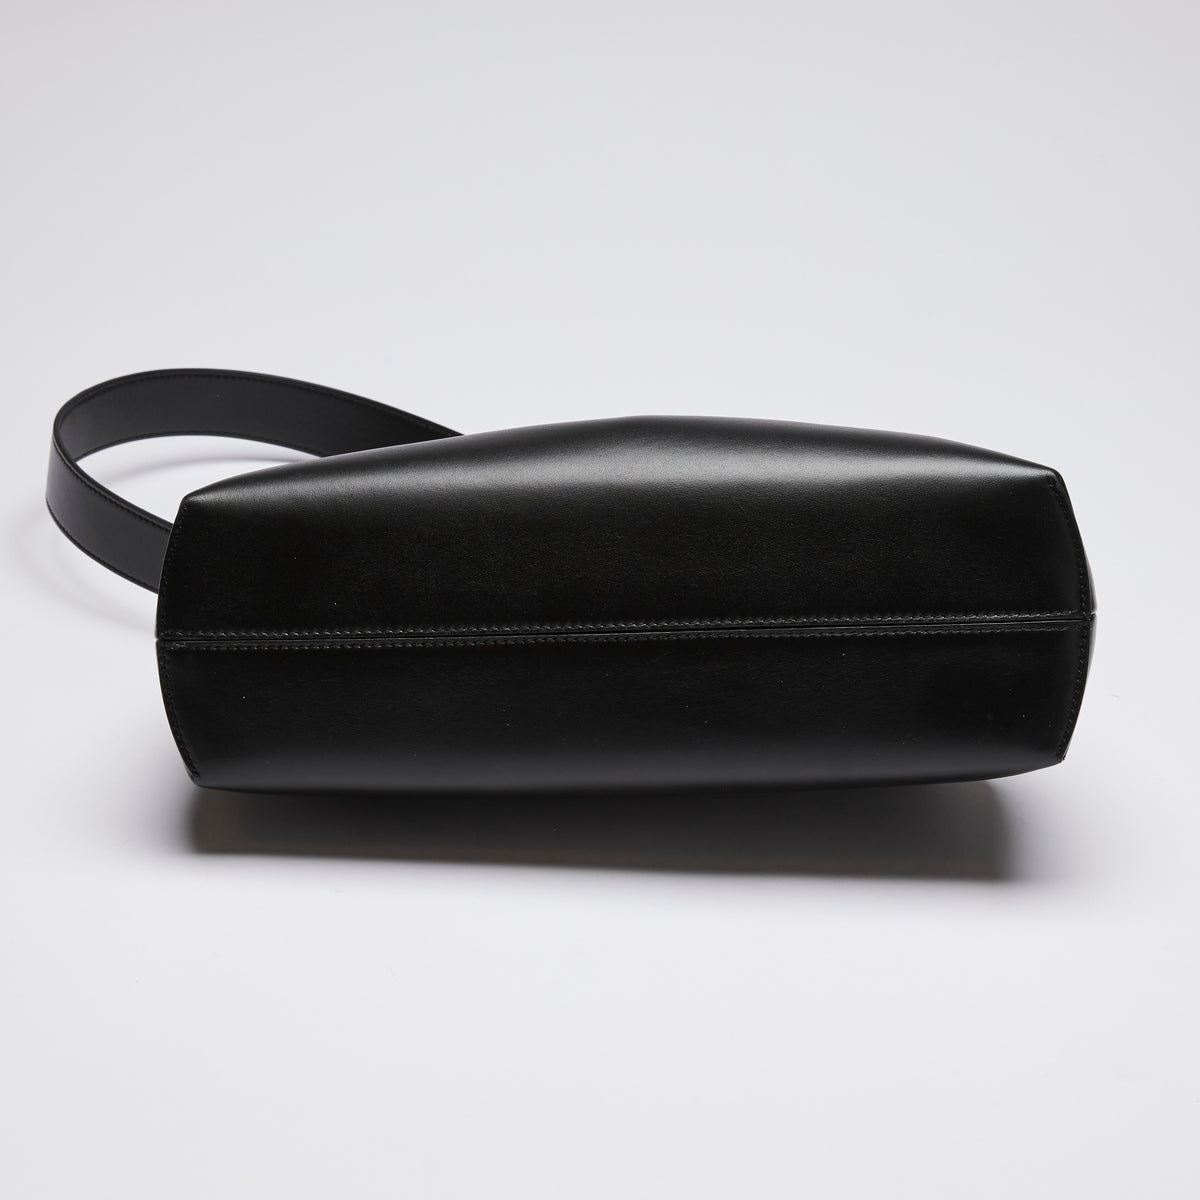 Excellent Pre-Loved Black Smooth Leather Asymmetrical Clutch Bag.(bottom)